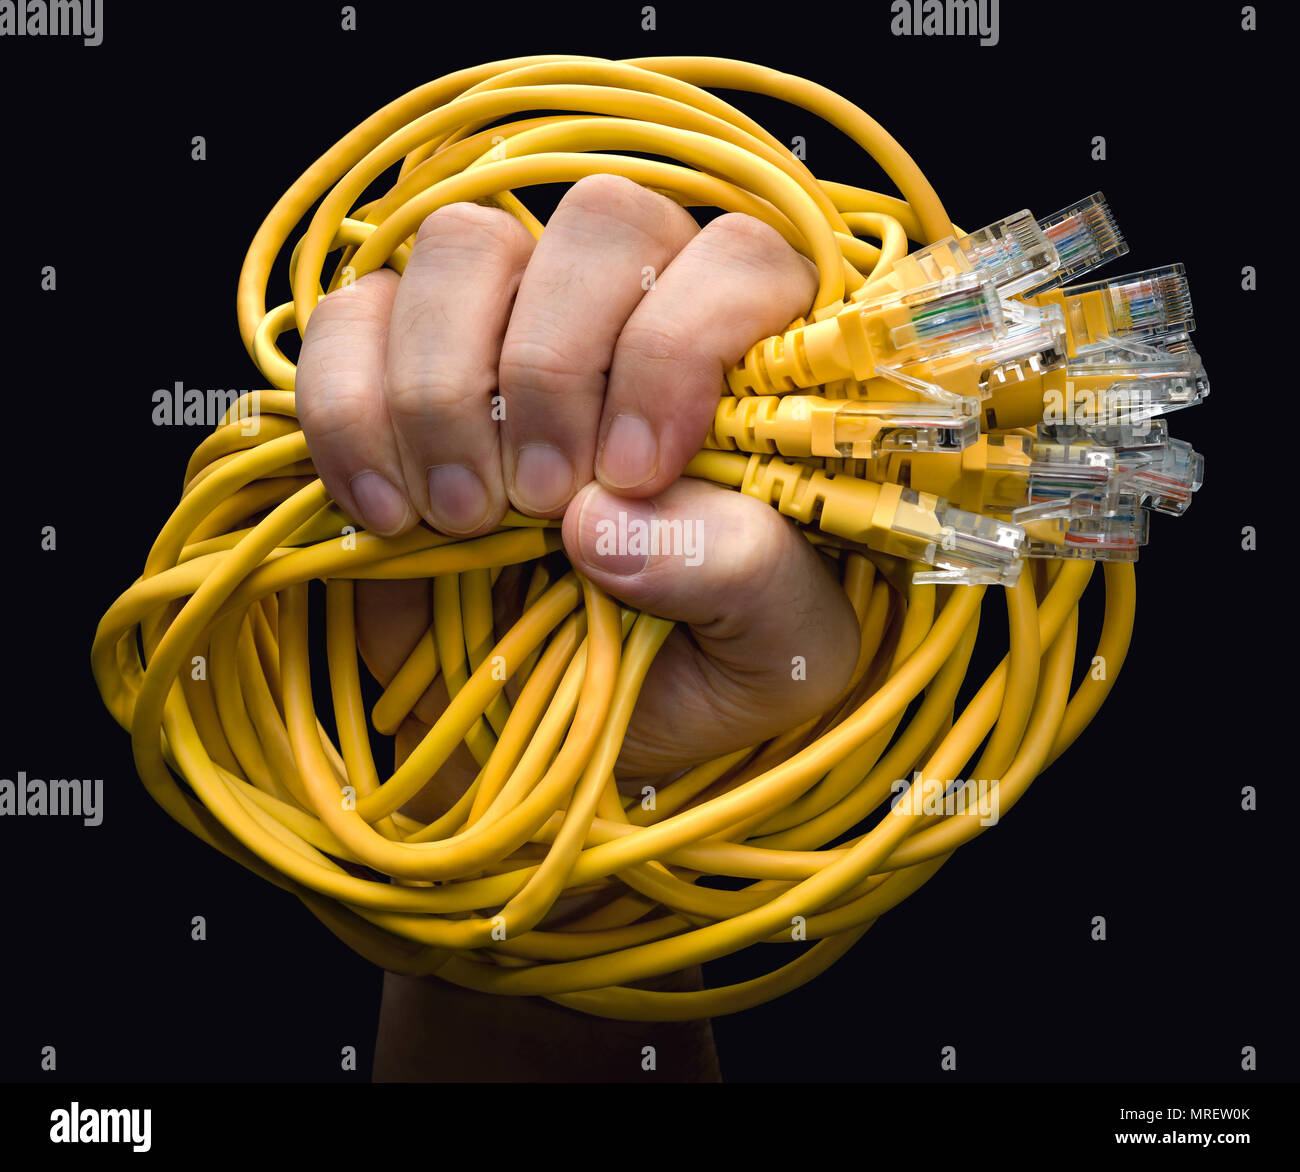 Person holding RJ45 cables. Stock Photo